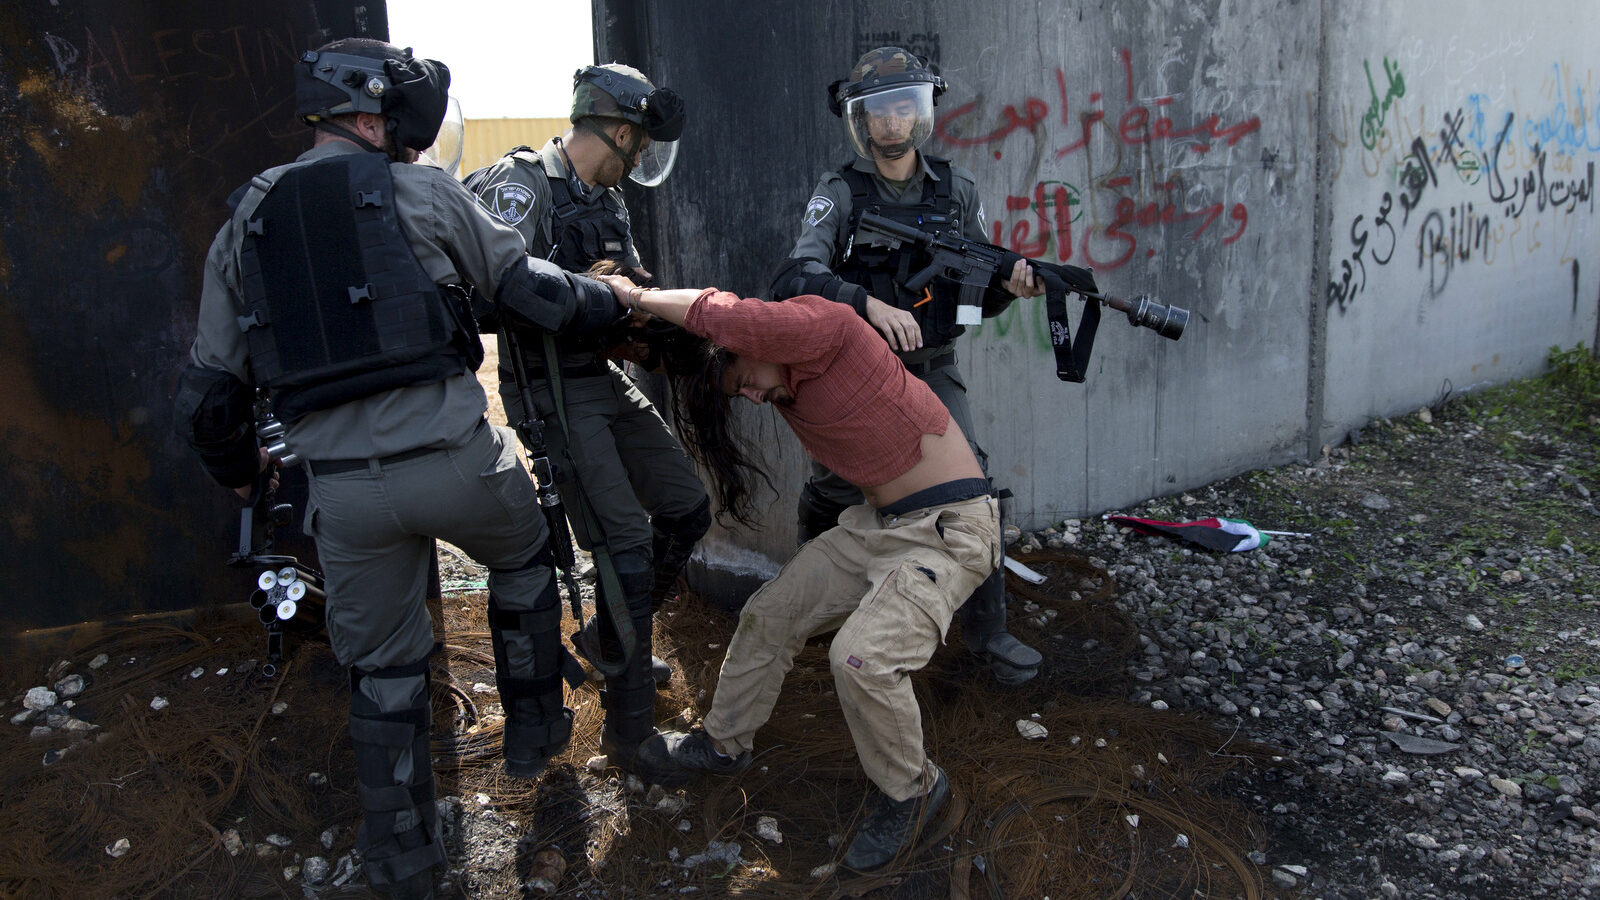 Israeli border police drag an activist by the next to Israel's apartheid wall during a protest in the occupied West Bank village of Bil'in, west of Ramallah, March 2, 2018. Palestinian protesters and foreign activists marched to commemorate the 13th anniversary of the ongoing weekly protests against the Israeli apartheid wall and Jewish-only settlements in Bil'in. (AP/Nasser Nasser)Israeli border police drag an activist by the next to Israel's apartheid wall during a protest in the occupied West Bank village of Bil'in, west of Ramallah, March 2, 2018. Palestinian protesters and foreign activists marched to commemorate the 13th anniversary of the ongoing weekly protests against the Israeli apartheid wall and Jewish-only settlements in Bil'in. (AP/Nasser Nasser)